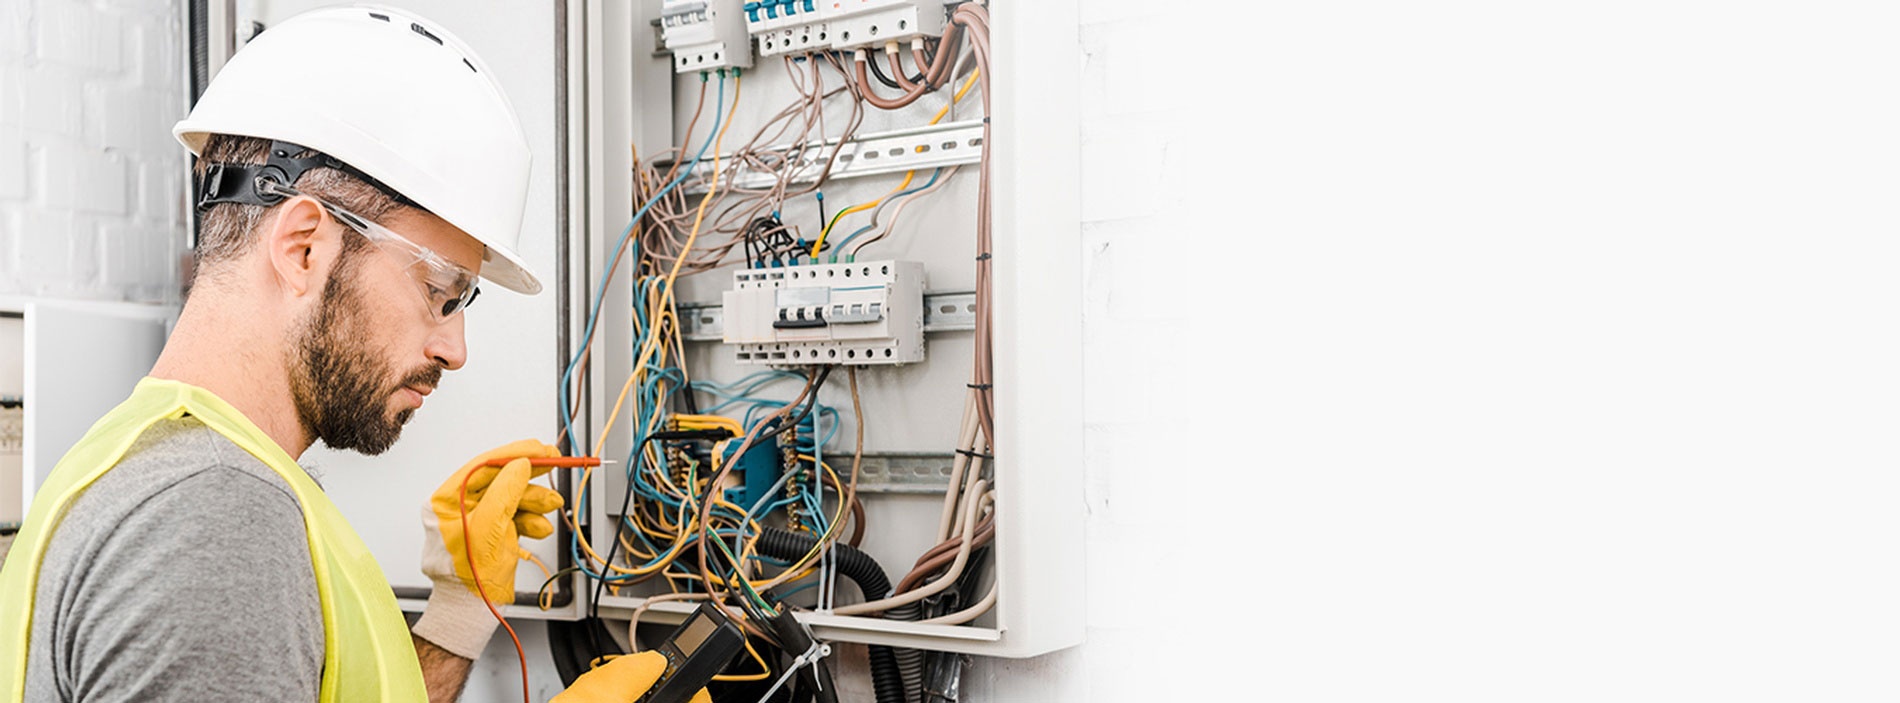 Read the latest blogs by CarmTech Electric Ltd - Electrical Contractors and Electricians in the Greater Toronto Area